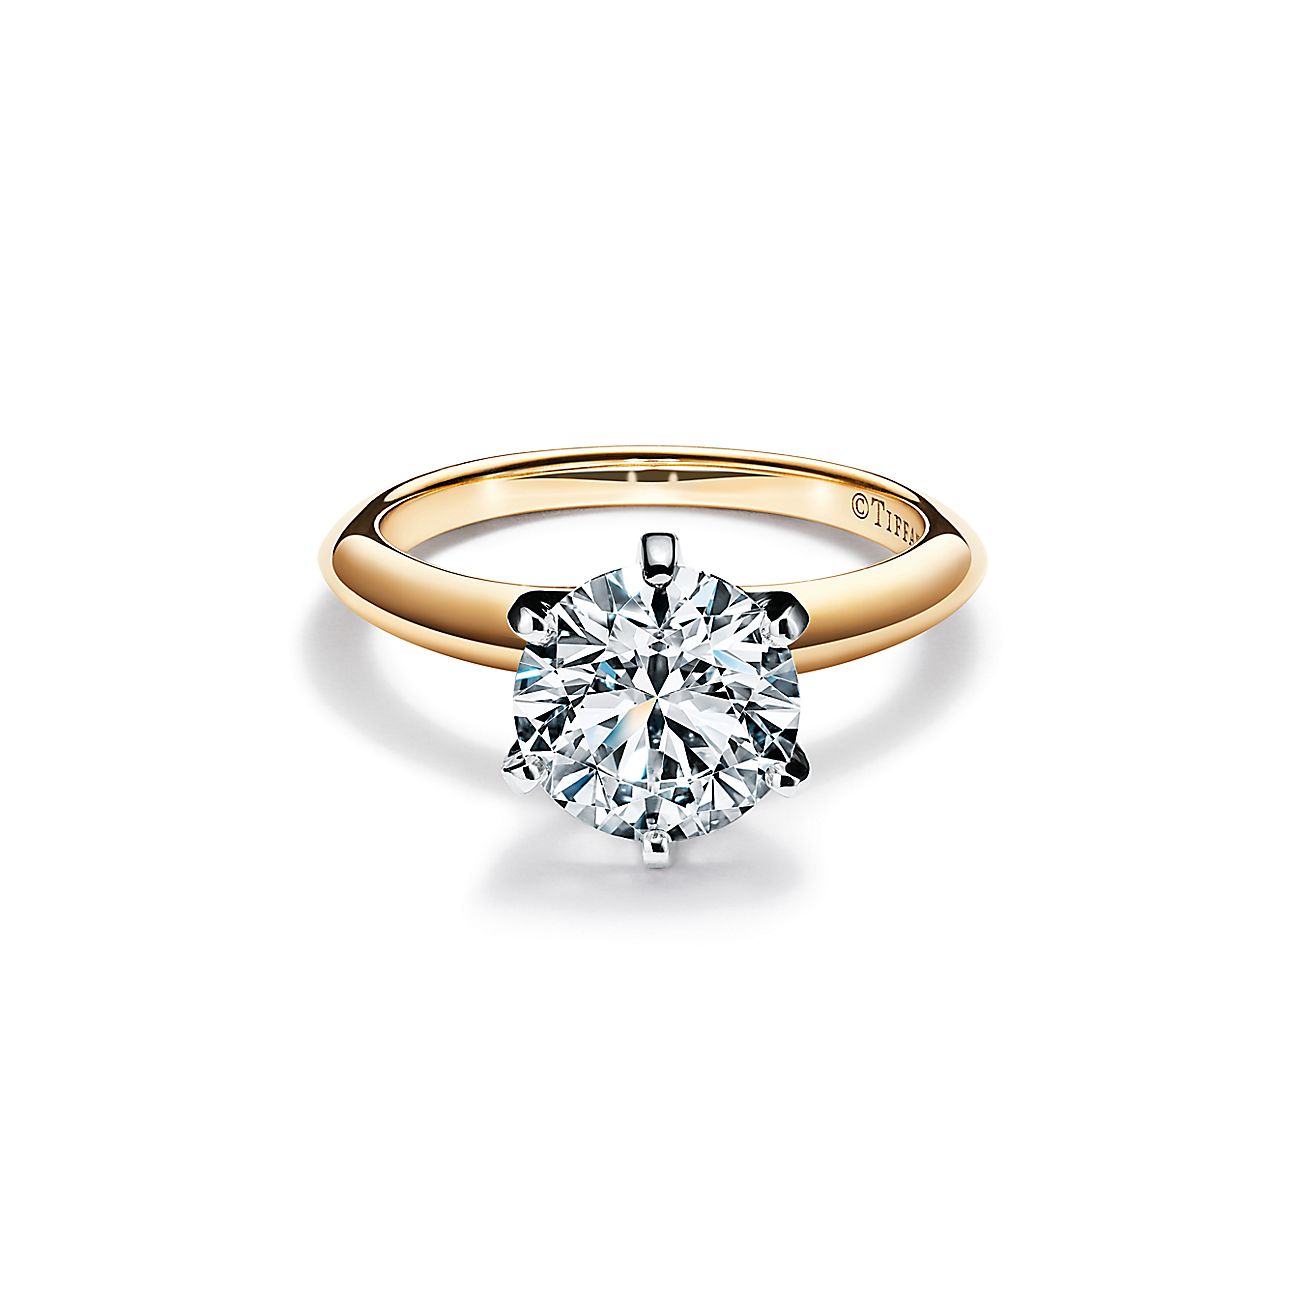 Tiffany & Co. - Made for each other. Tiffany True rings are modern